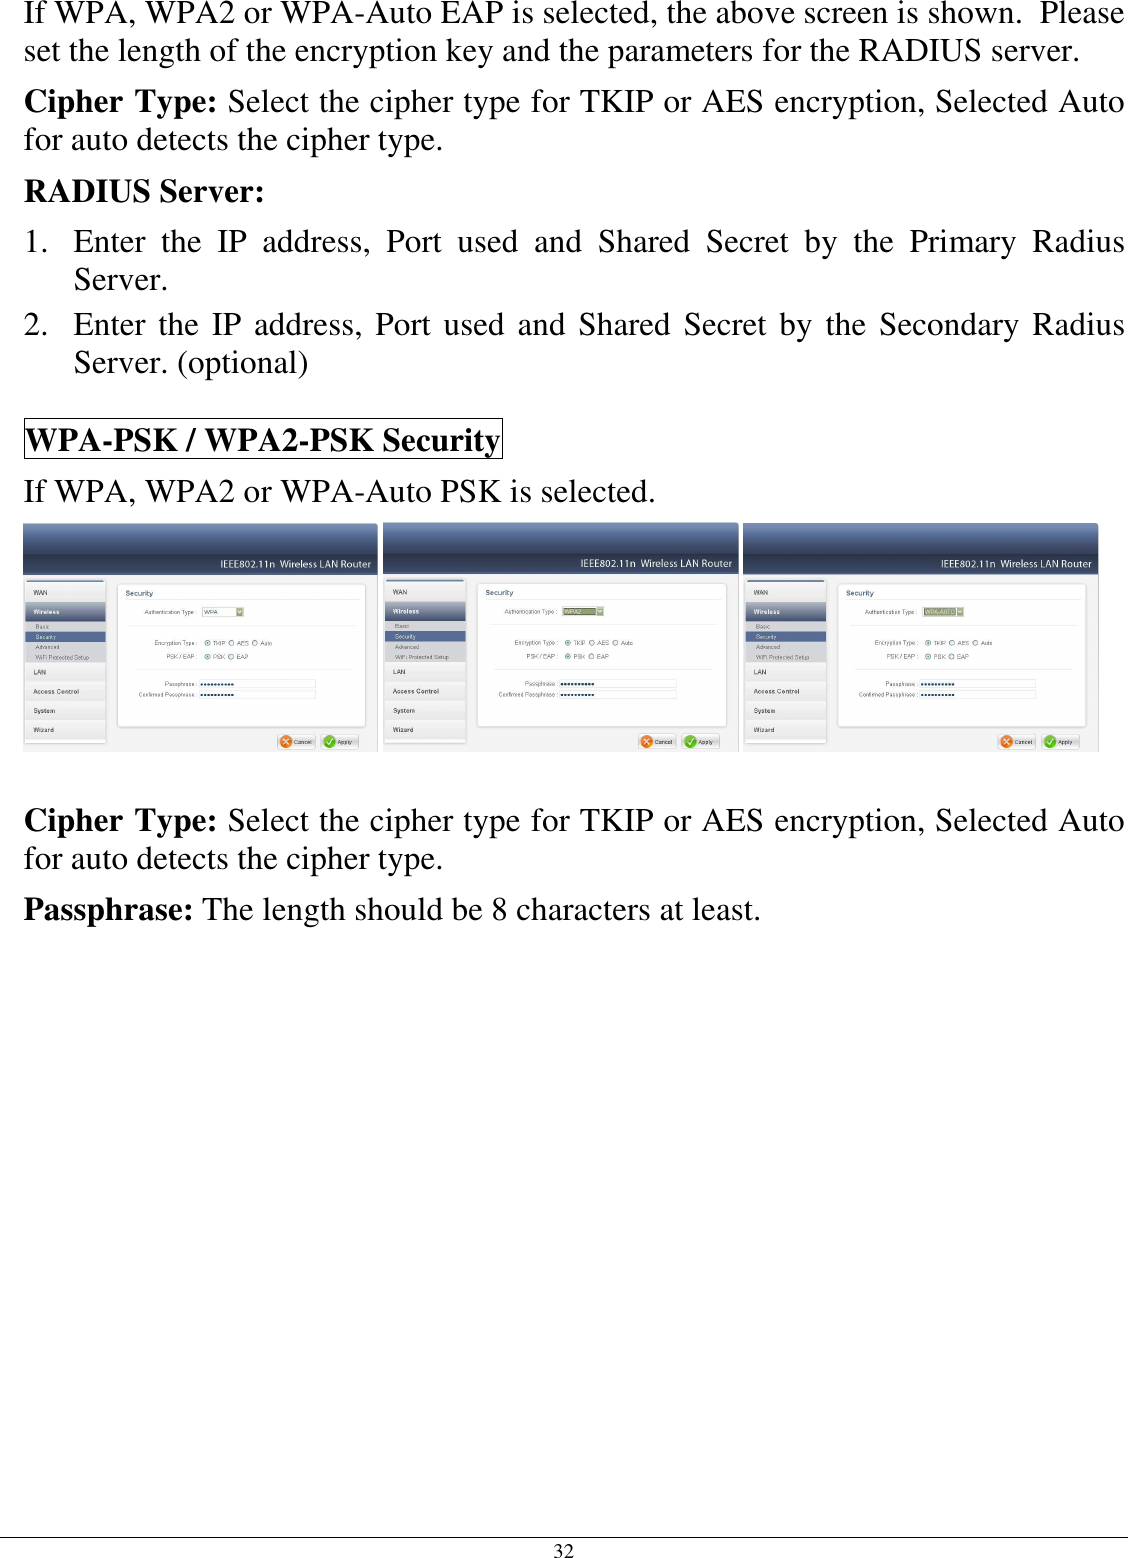 32 If WPA, WPA2 or WPA-Auto EAP is selected, the above screen is shown.  Please set the length of the encryption key and the parameters for the RADIUS server. Cipher Type: Select the cipher type for TKIP or AES encryption, Selected Auto for auto detects the cipher type.  RADIUS Server: 1. Enter  the  IP  address,  Port  used  and  Shared  Secret  by  the  Primary  Radius Server. 2. Enter the IP address, Port used and Shared Secret by the Secondary Radius Server. (optional) WPA-PSK / WPA2-PSK Security If WPA, WPA2 or WPA-Auto PSK is selected.     Cipher Type: Select the cipher type for TKIP or AES encryption, Selected Auto for auto detects the cipher type.  Passphrase: The length should be 8 characters at least.   